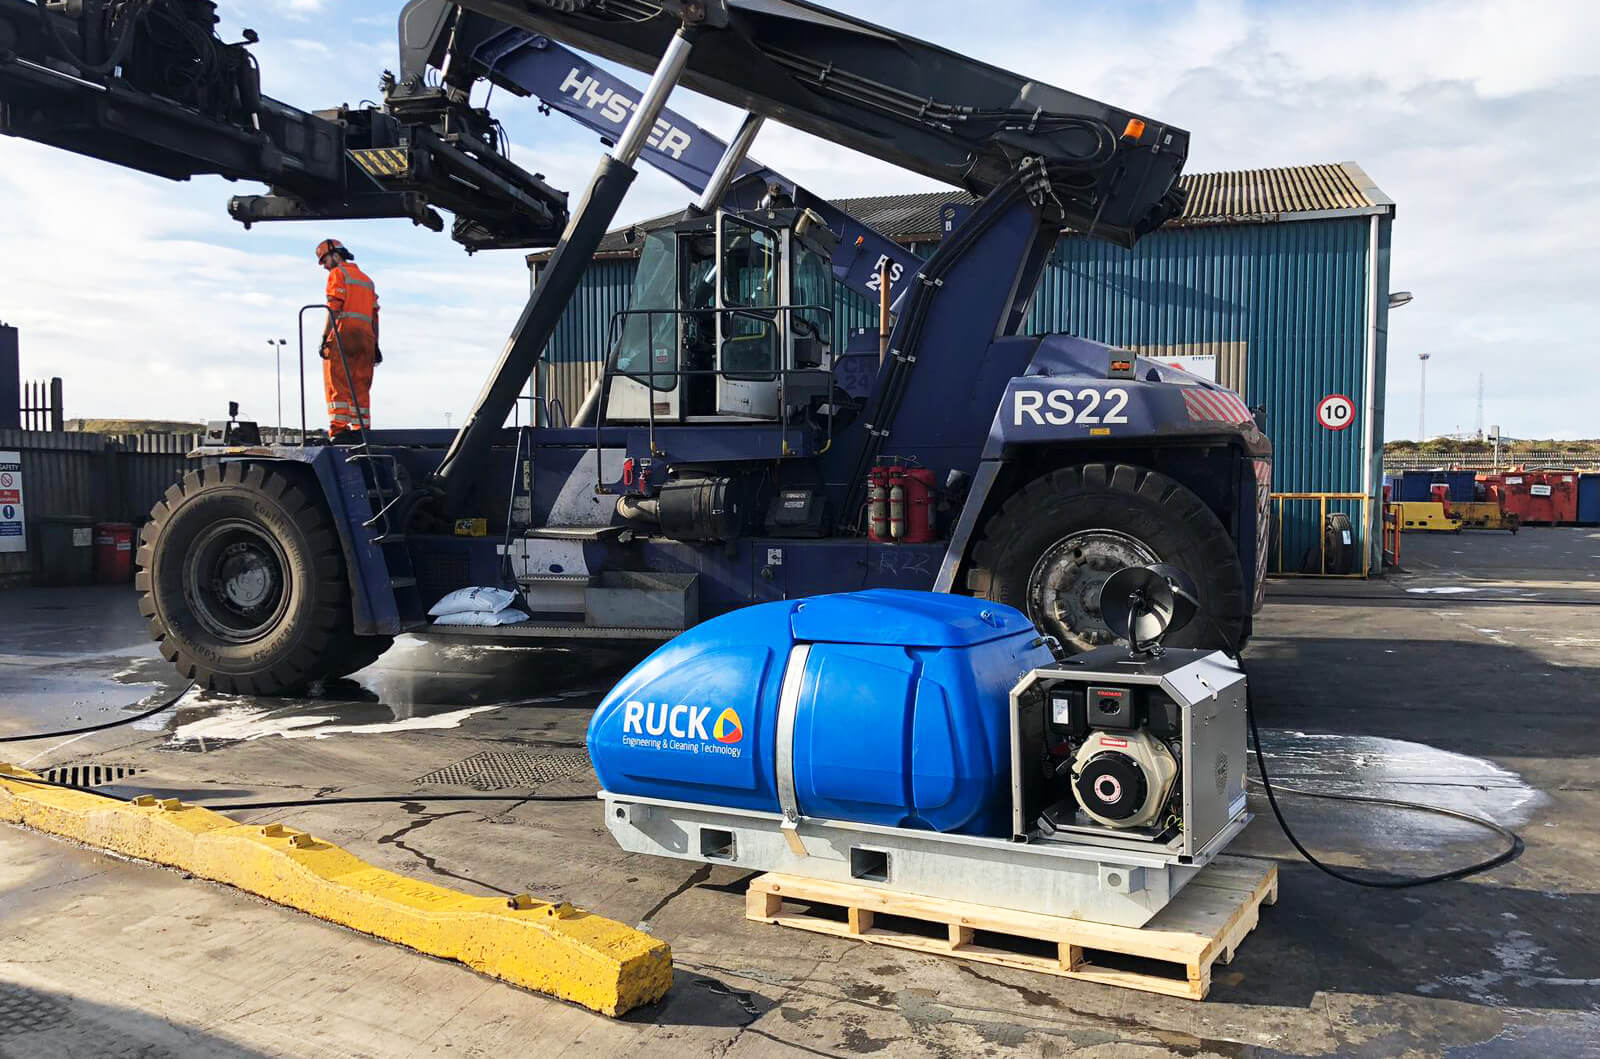 Ruck Engineering - Supplying industrial pressure washer equipment throughout Middlesbrough, Teesside and the Tees Valley. 